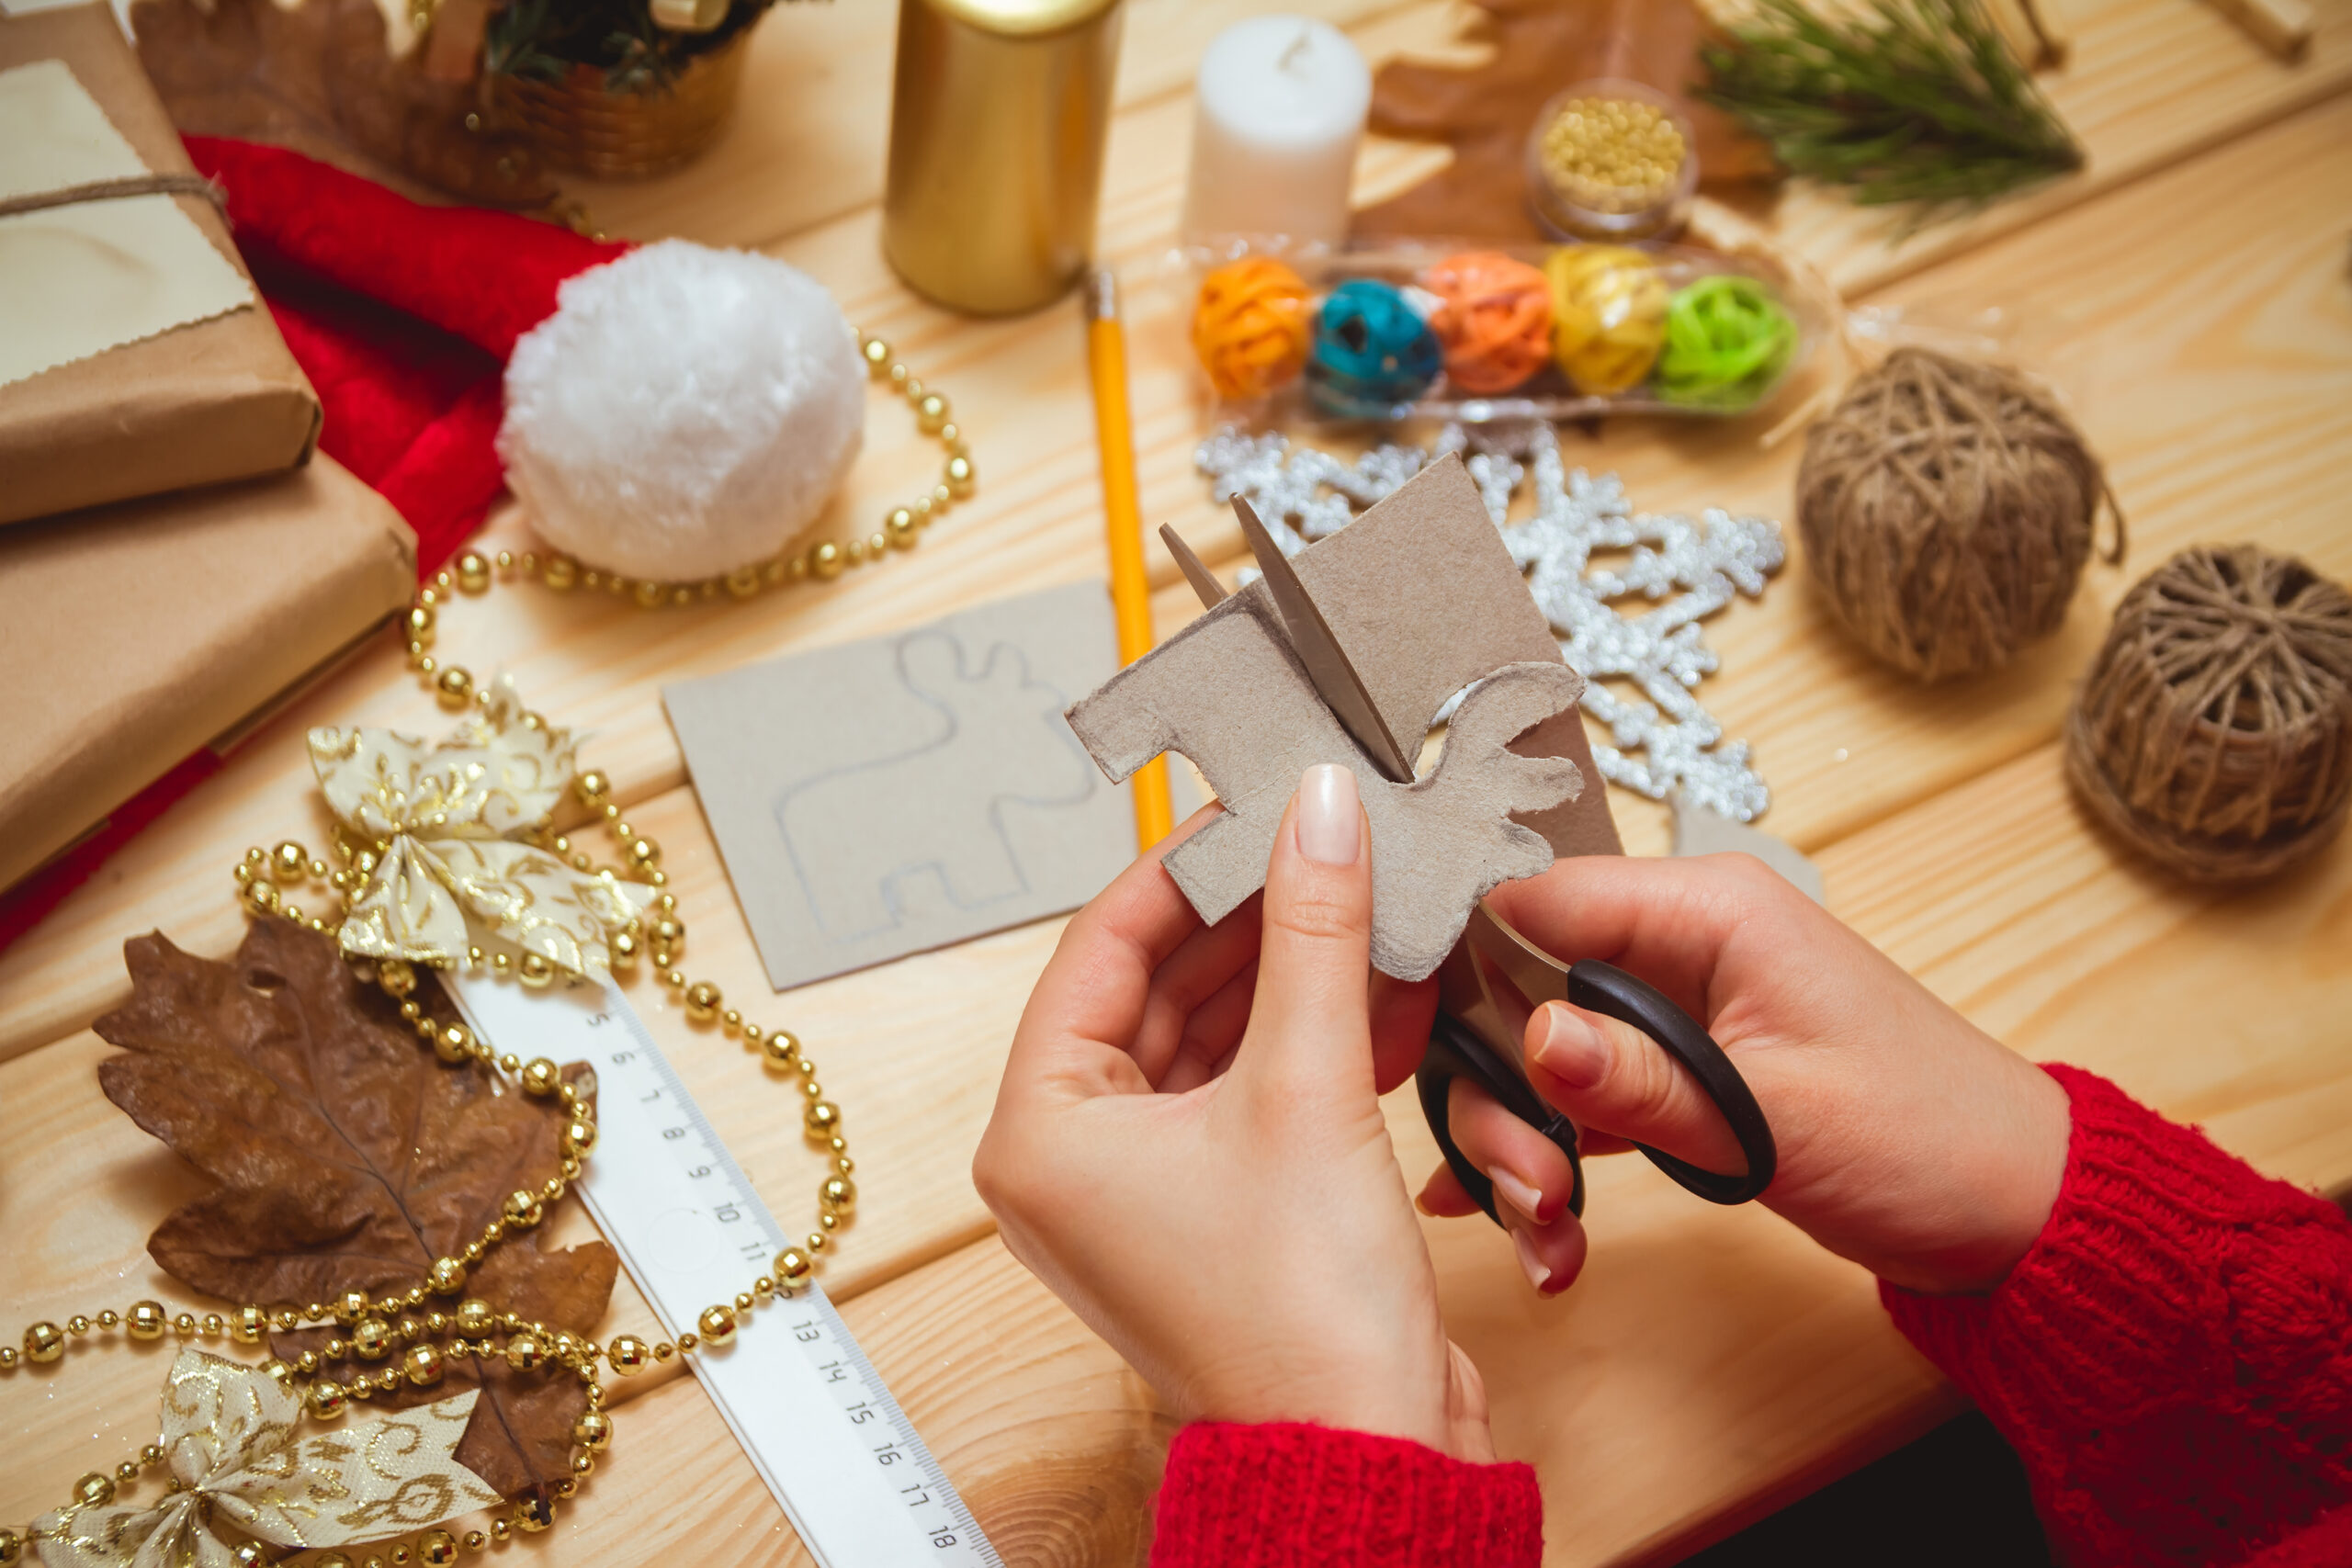 Gifting Expectations Around the Holidays